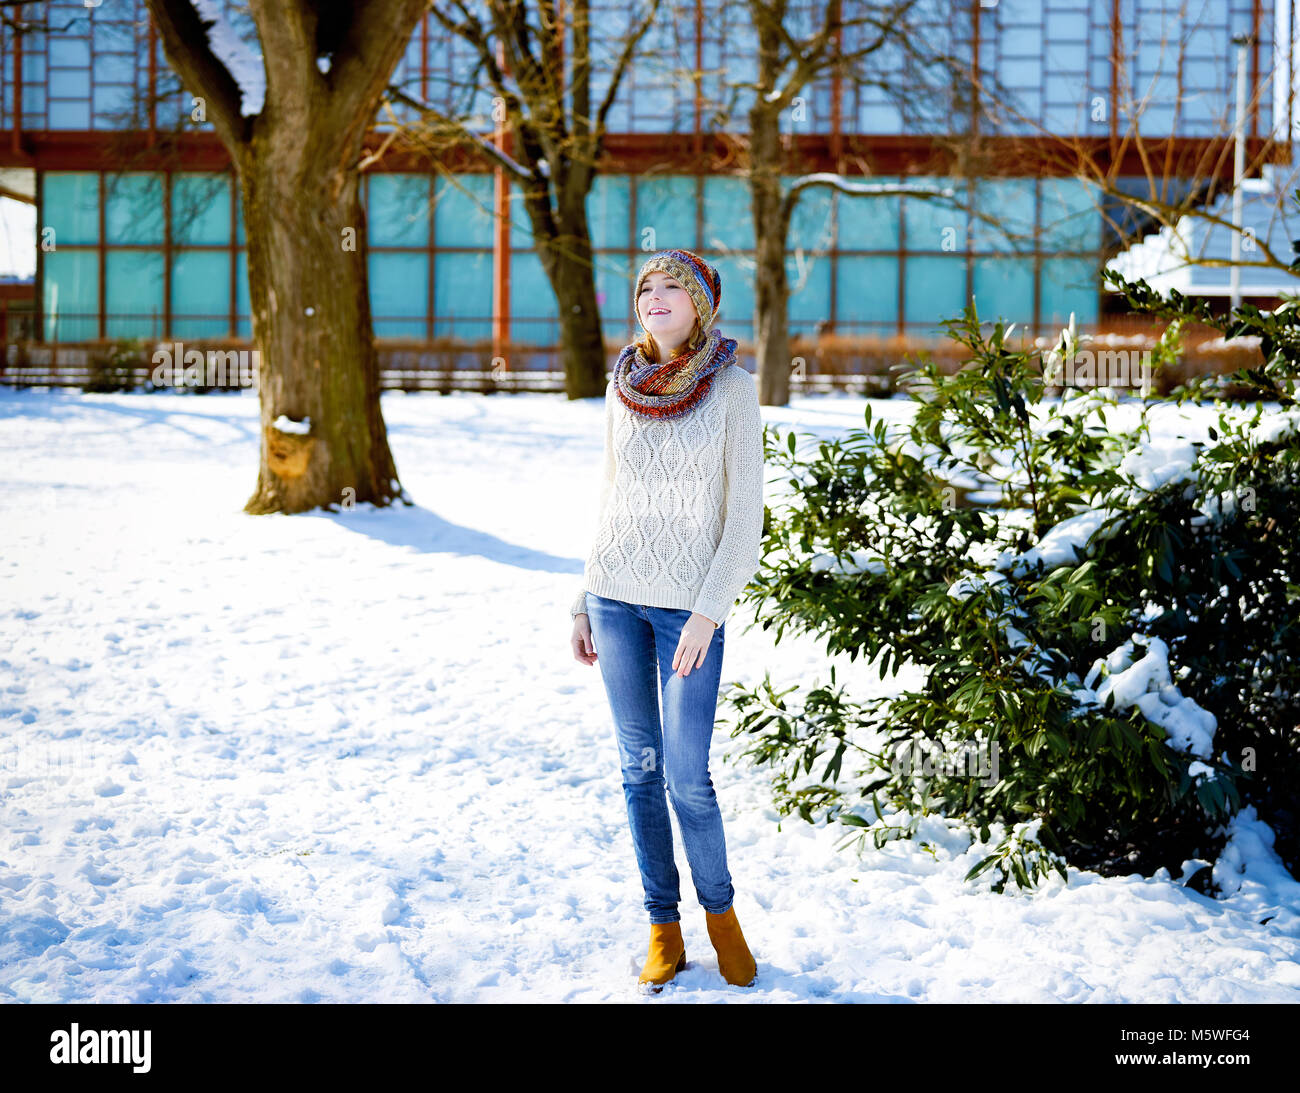 Beautiful woman in snowy city park Stock Photo